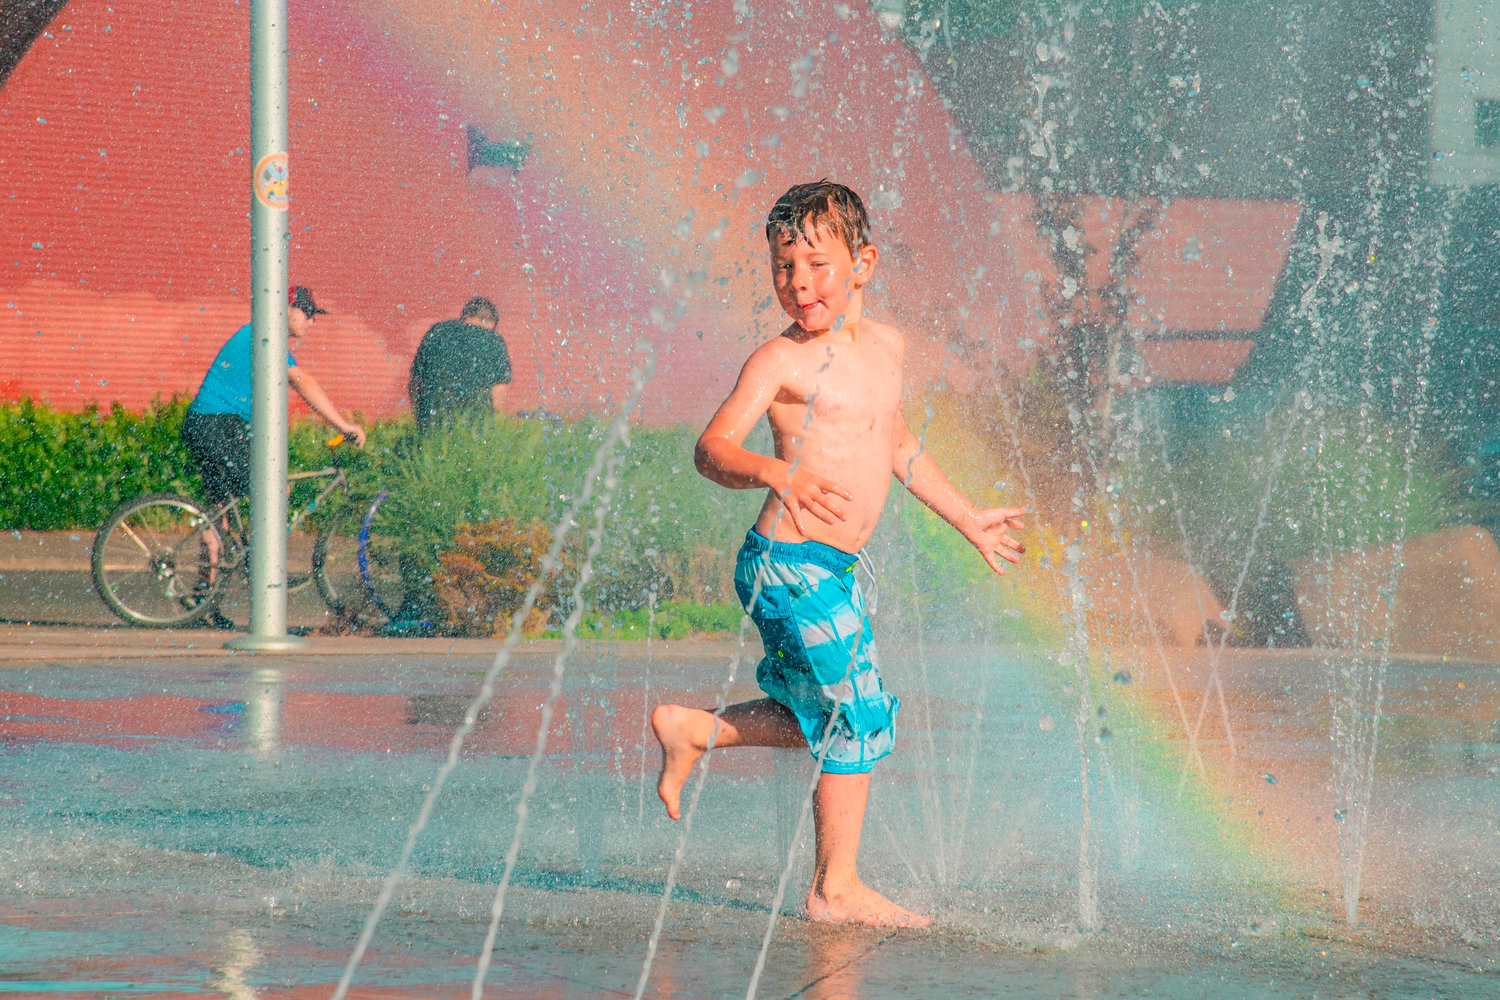 Tyrel Newkirk, 5, runs through streams of water to cool off at the Centralia splash park last month.